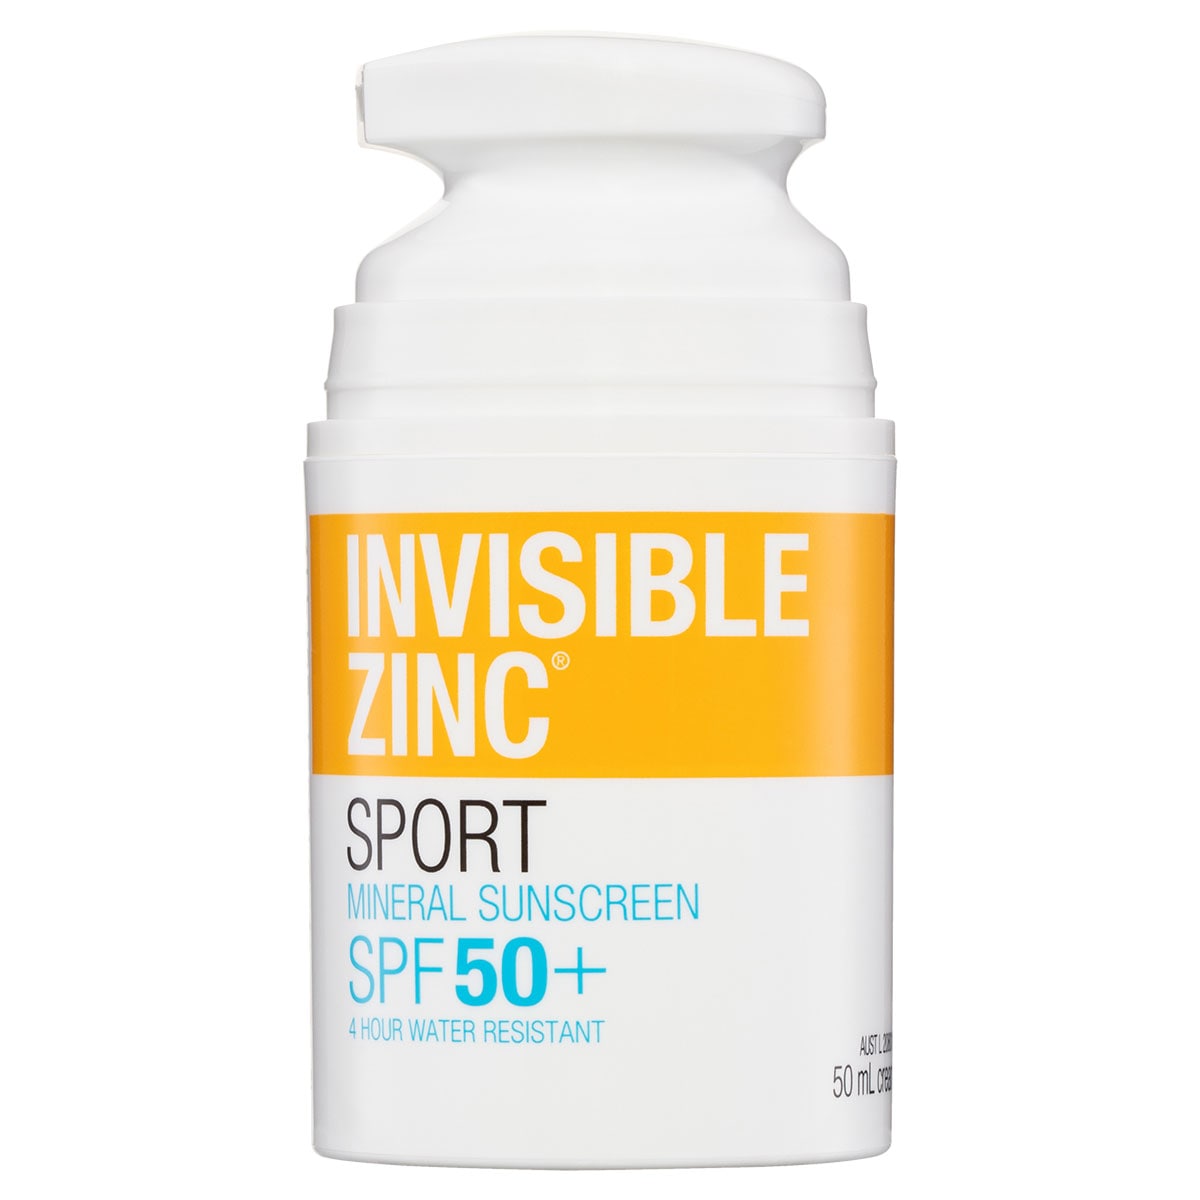 Invisible Zinc Sunscreen 4 Hour Water Resistant SPF50+ 50ml